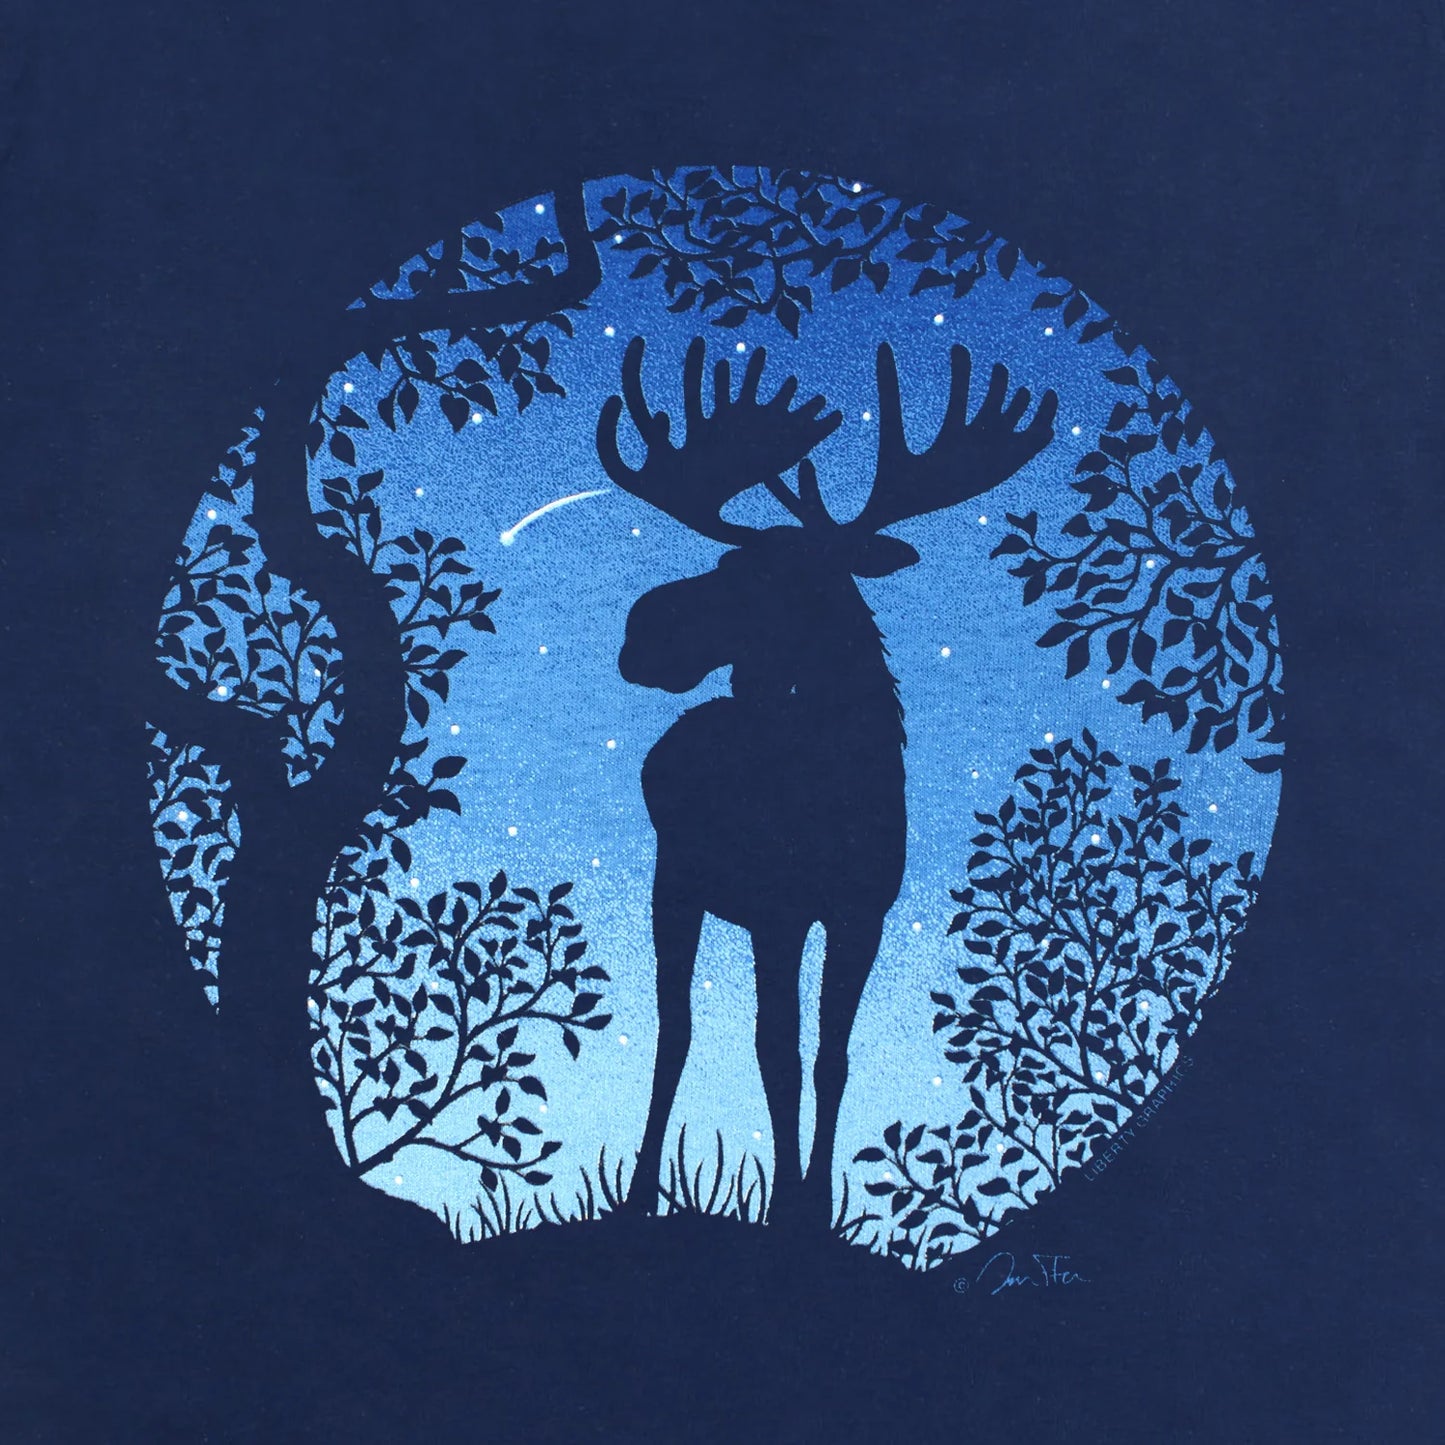 Twilight Moose Ladies Adult T-Shirt by Liberty Graphics